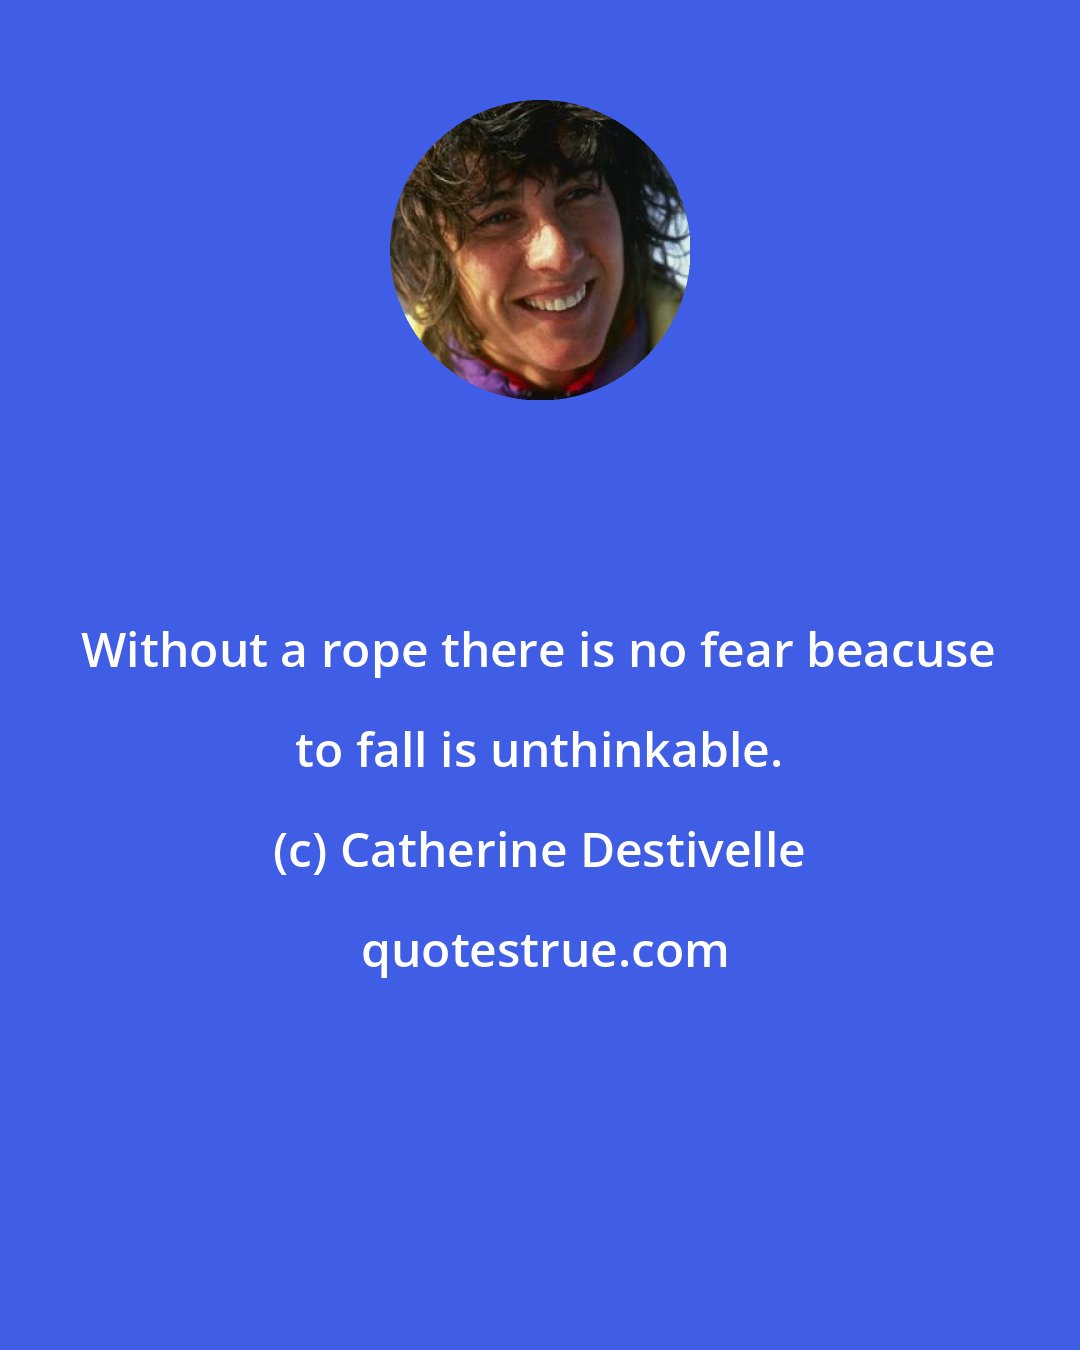 Catherine Destivelle: Without a rope there is no fear beacuse to fall is unthinkable.